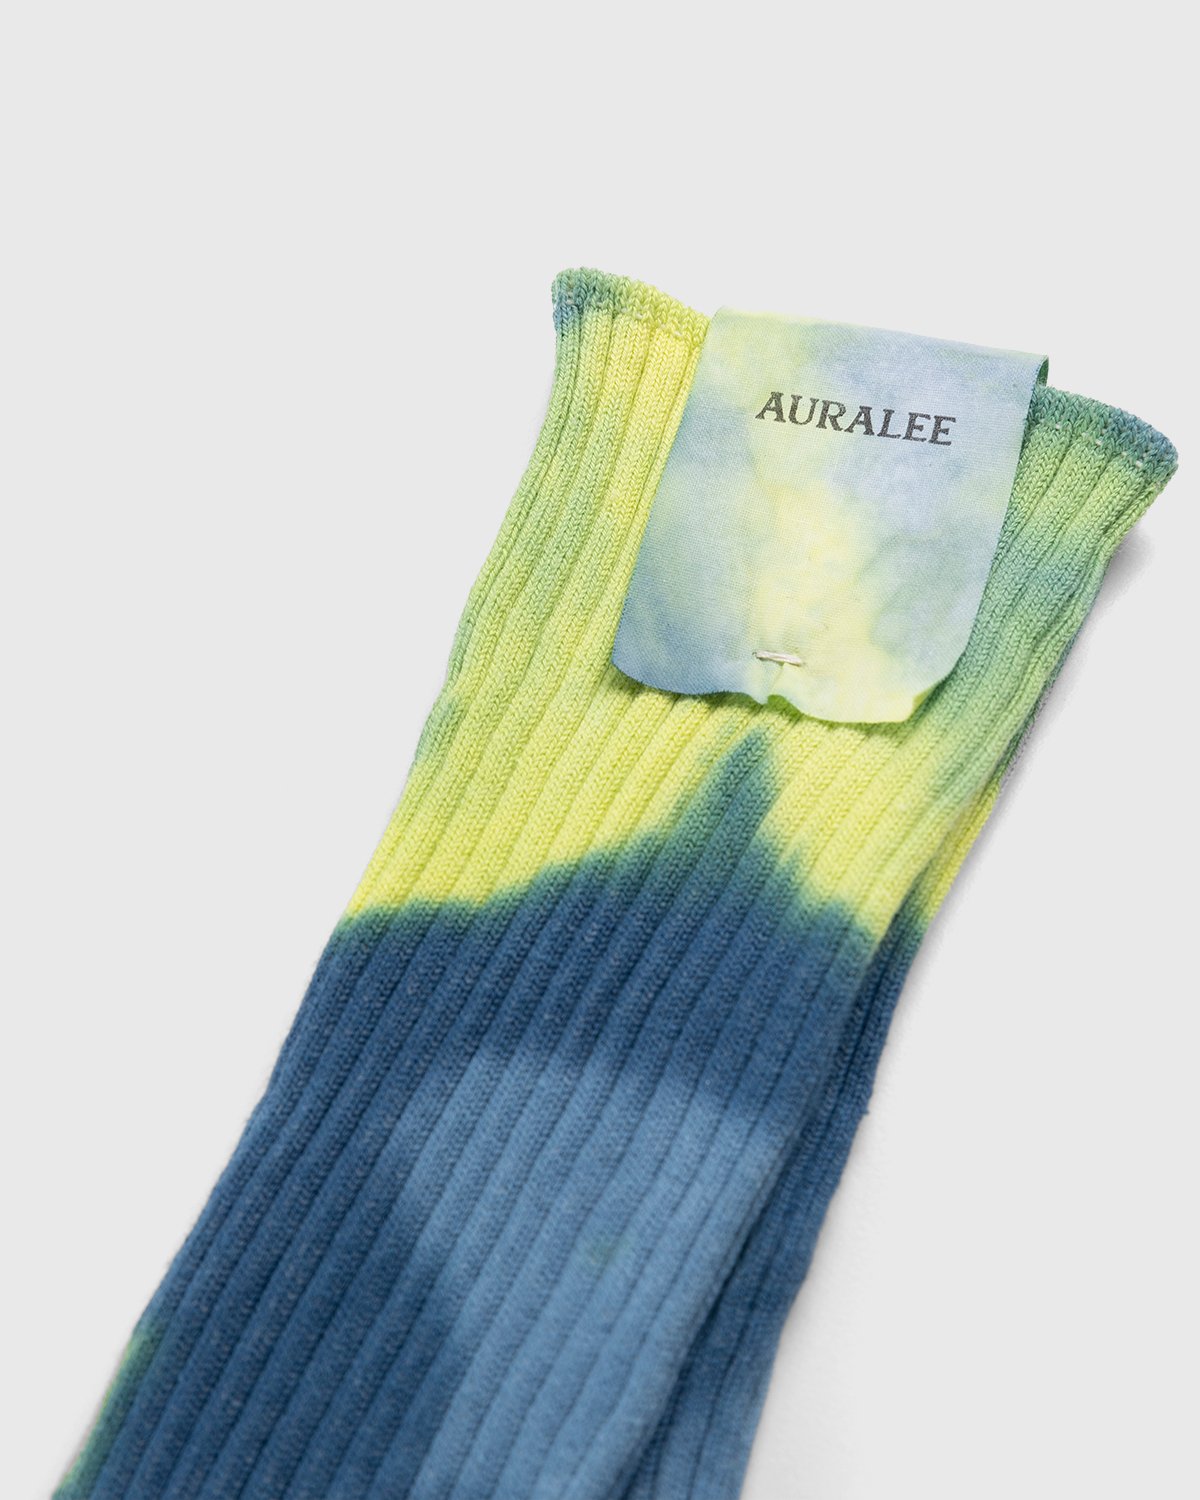 Auralee - Giza Cotton Dyed Socks BLUE YELLOW DYE - Accessories - Blue - Image 2